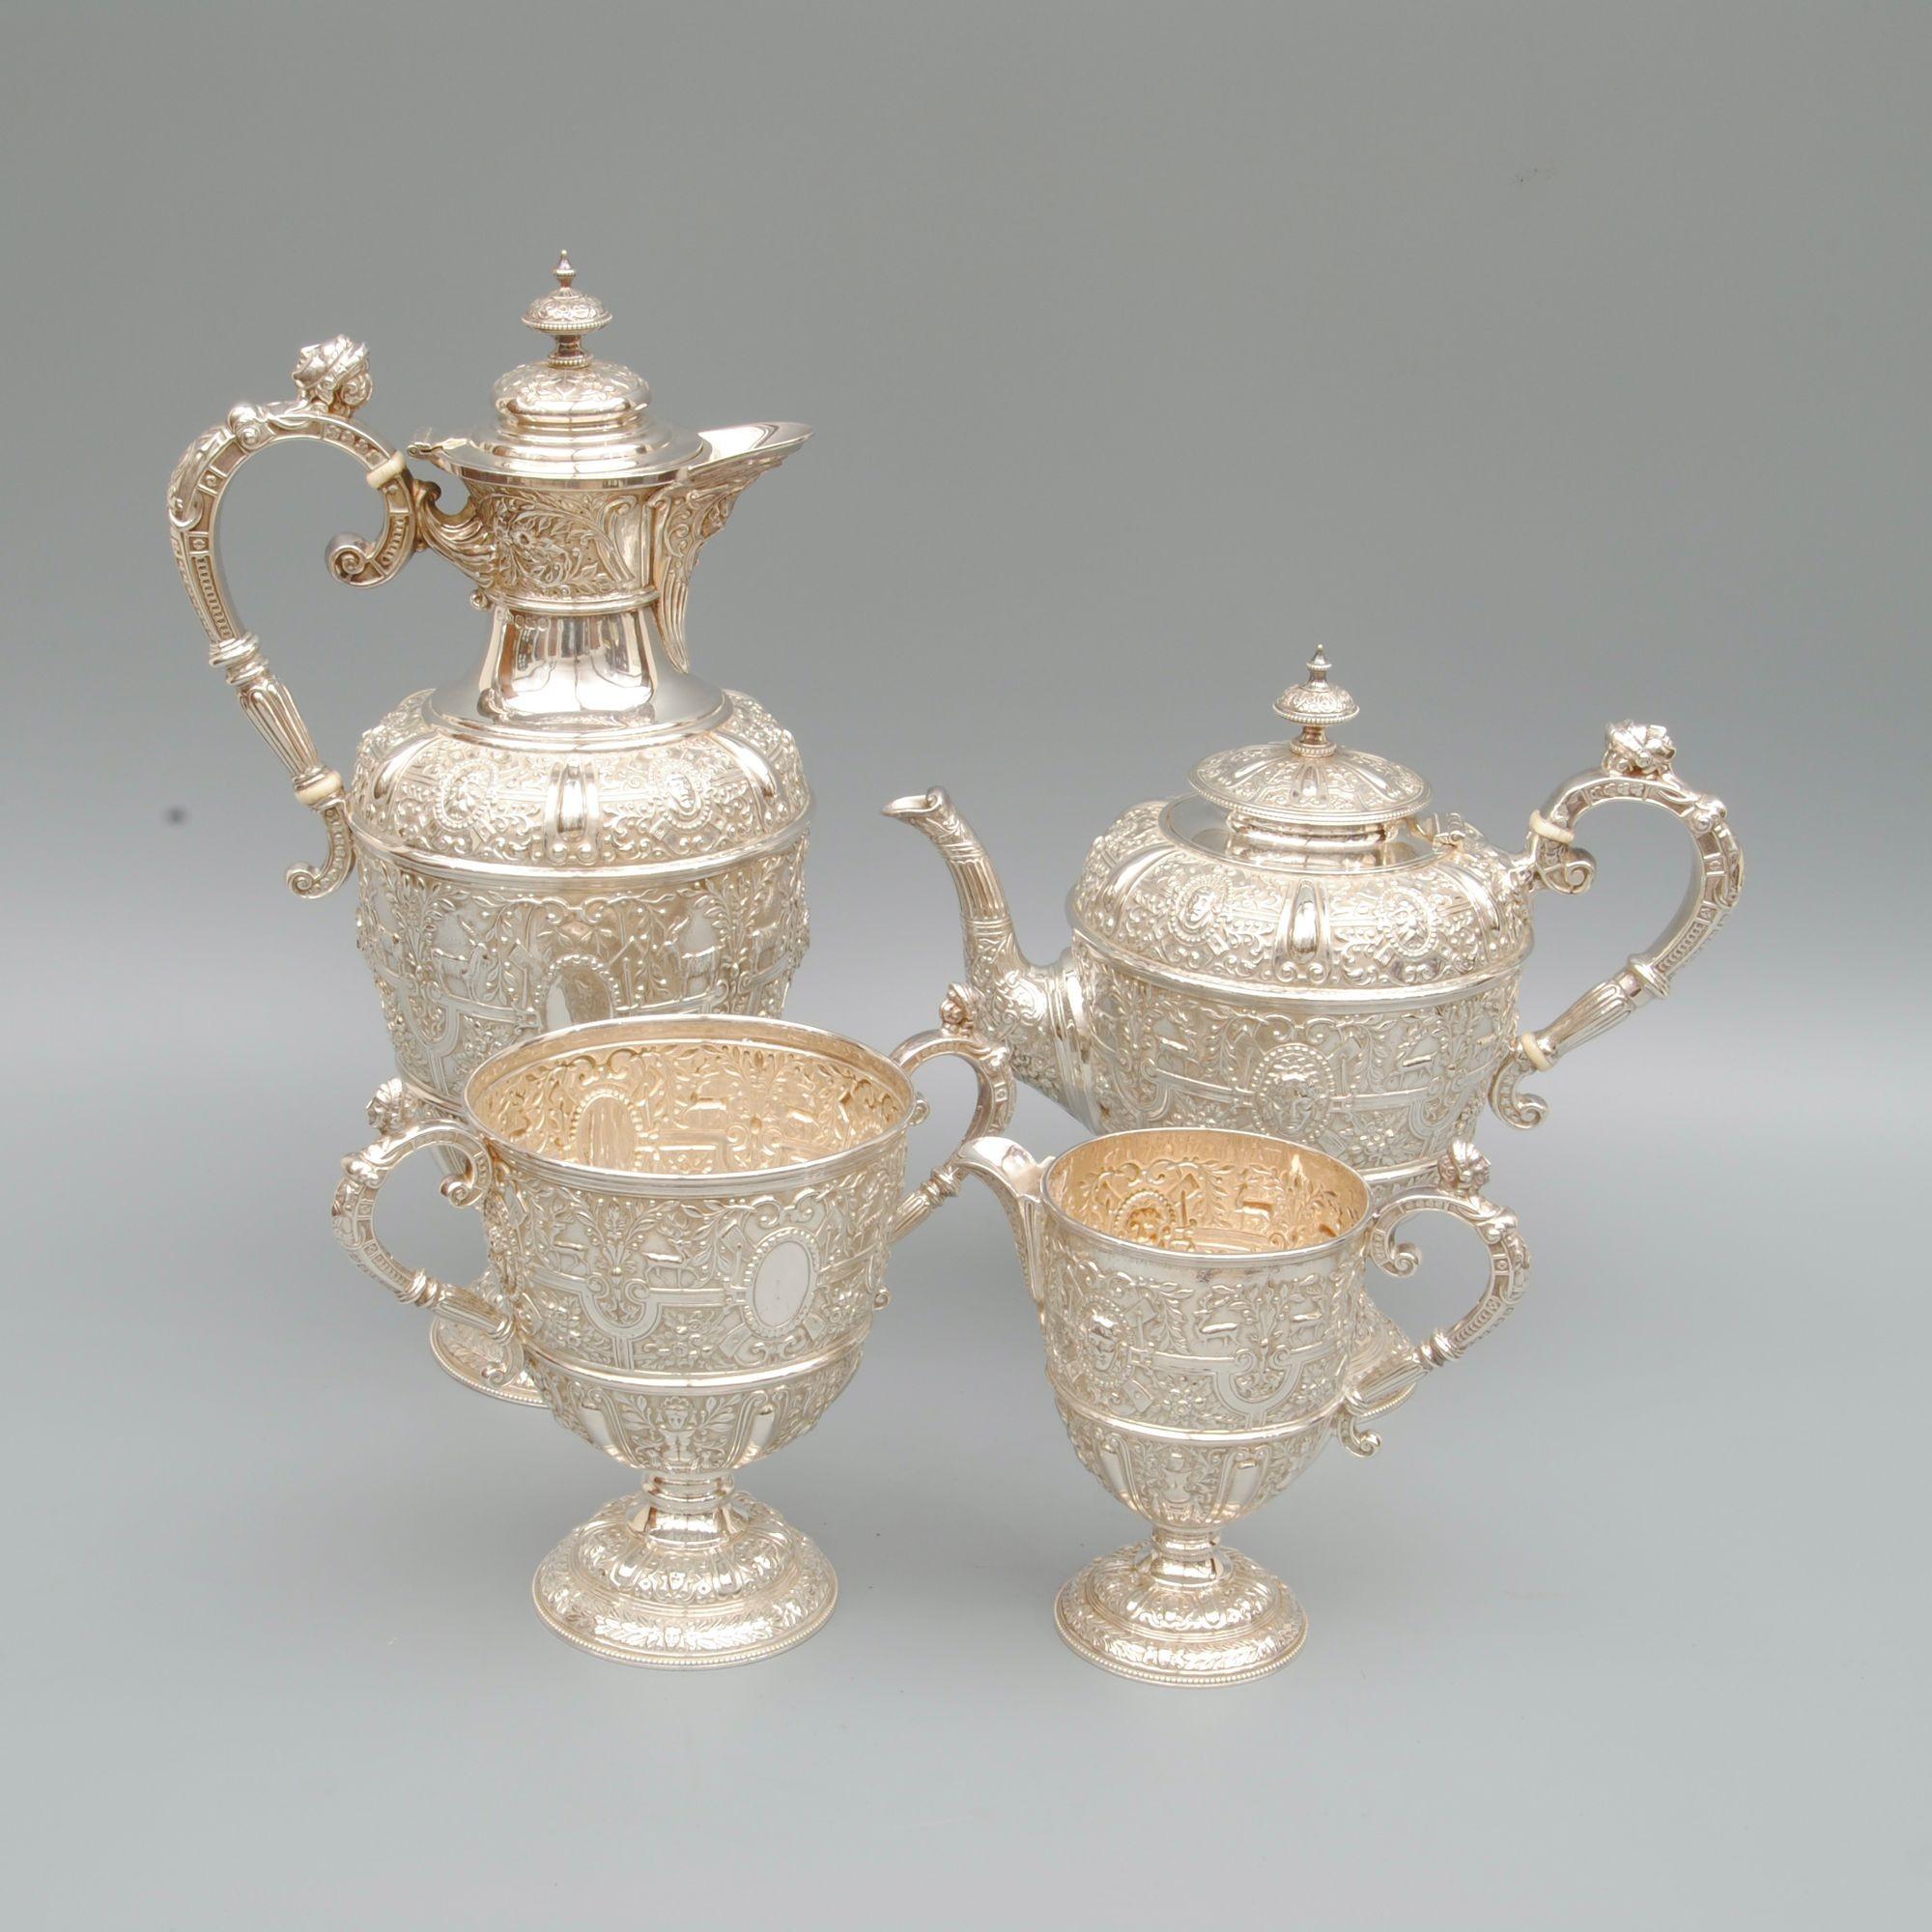 A late 19th century 4 piece silver tea service in the 